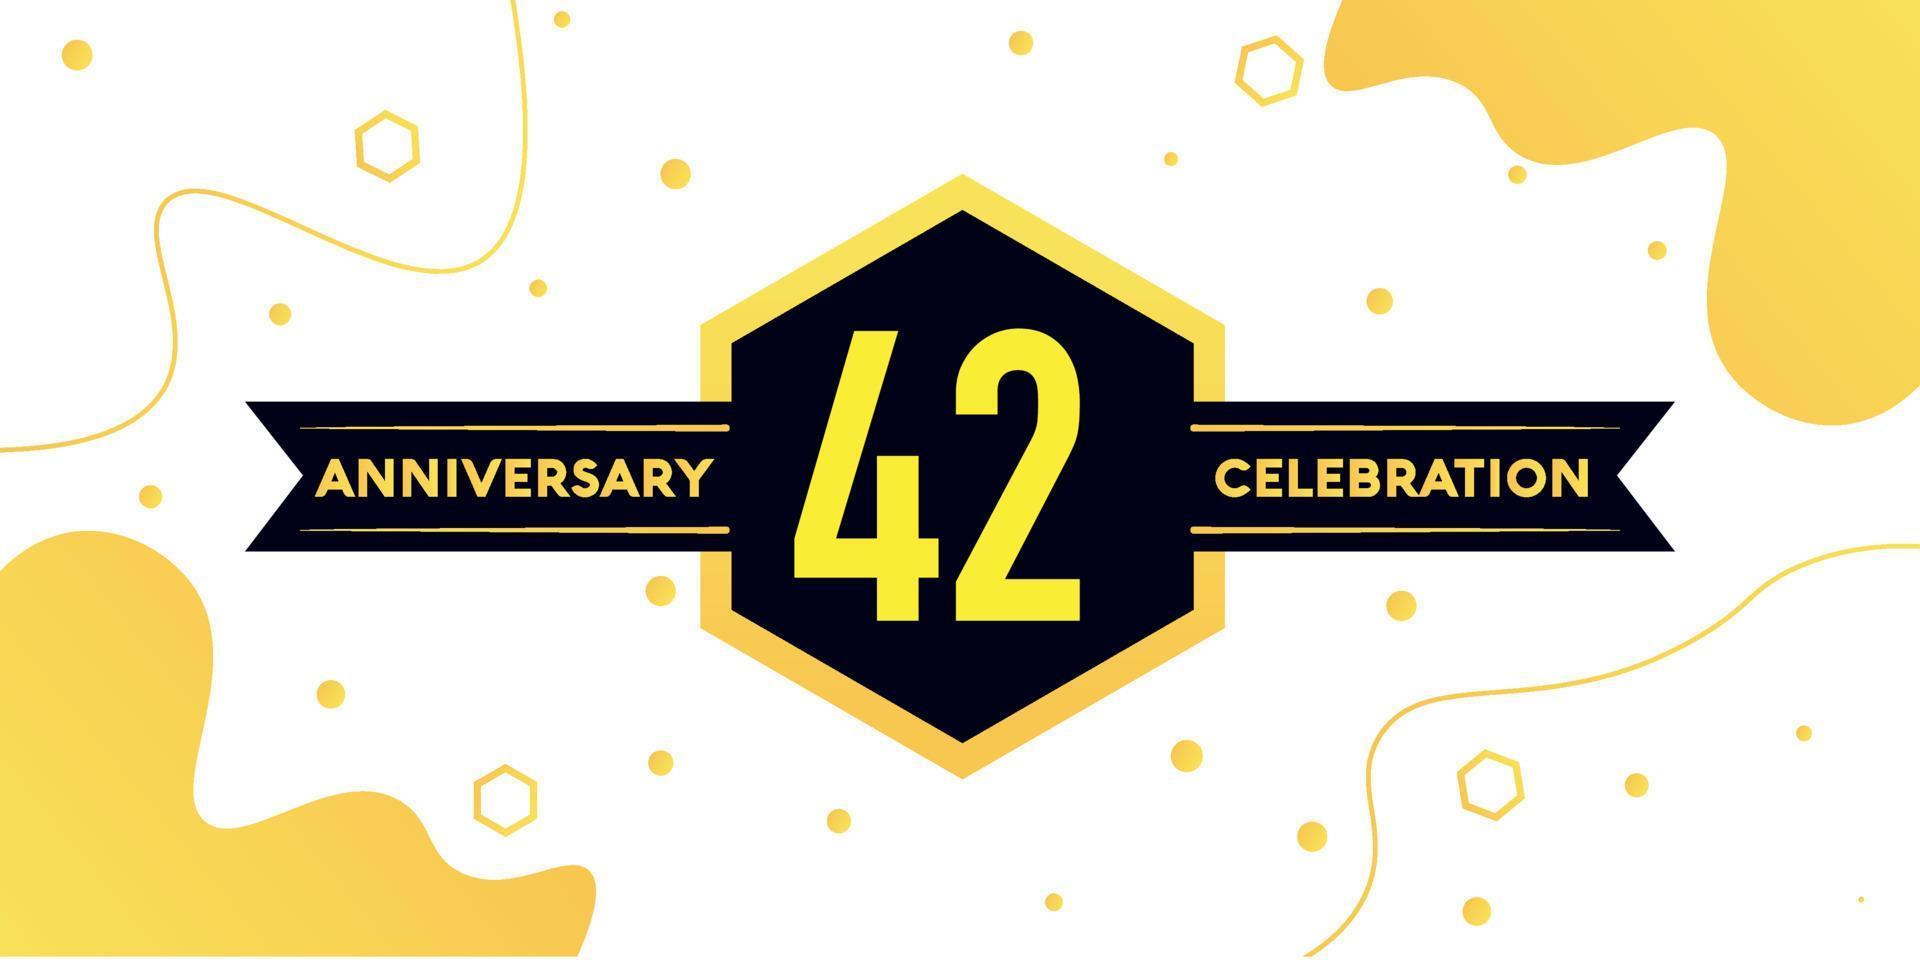 42 years anniversary logo vector design with yellow geometric shape with black and abstract design on white background template